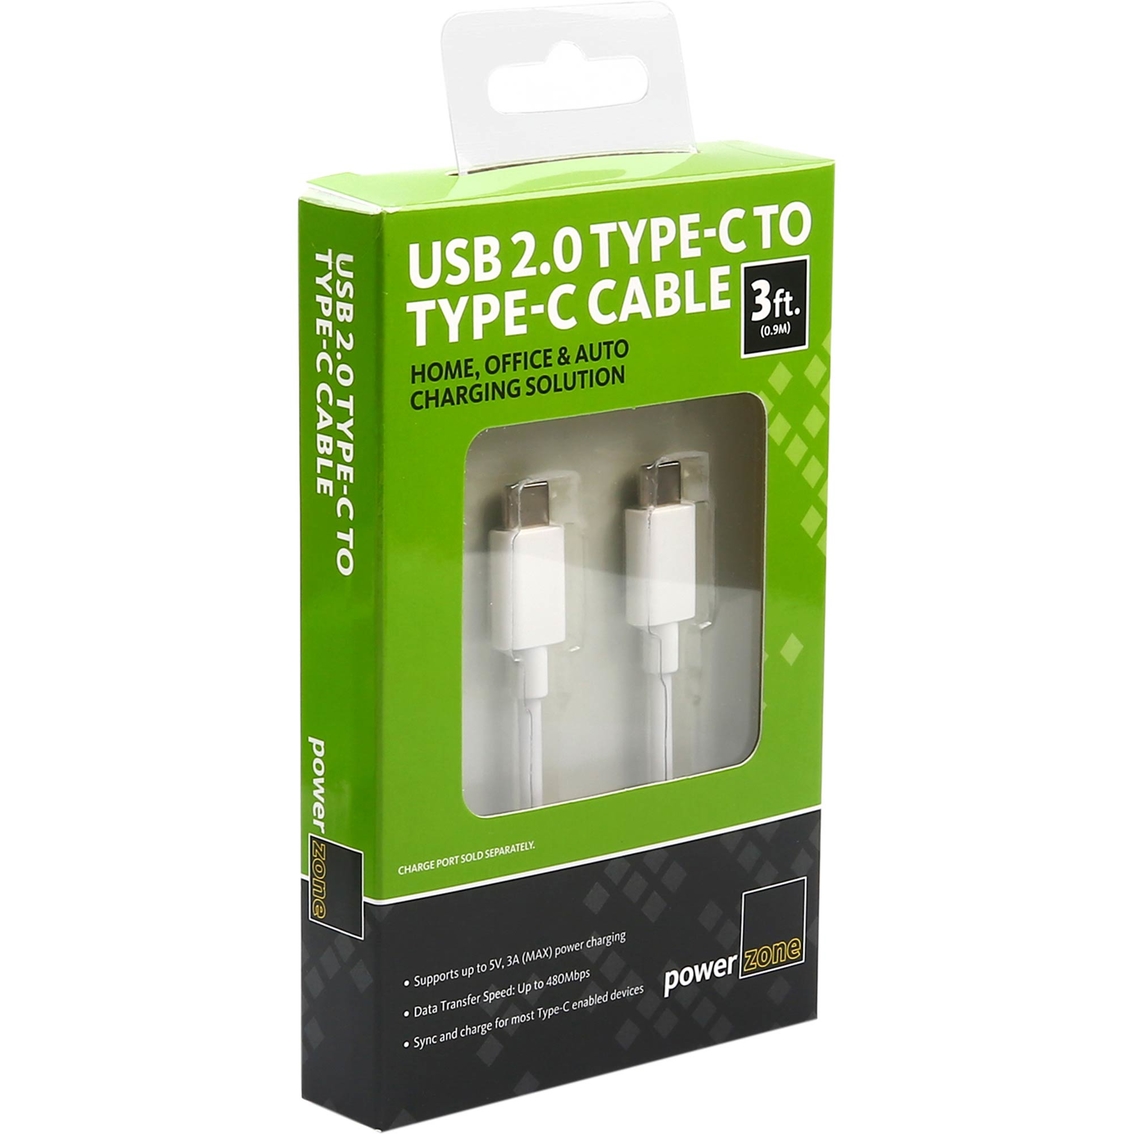 USB2.0 Type C to Type C Cable 3ft White - Image 3 of 3